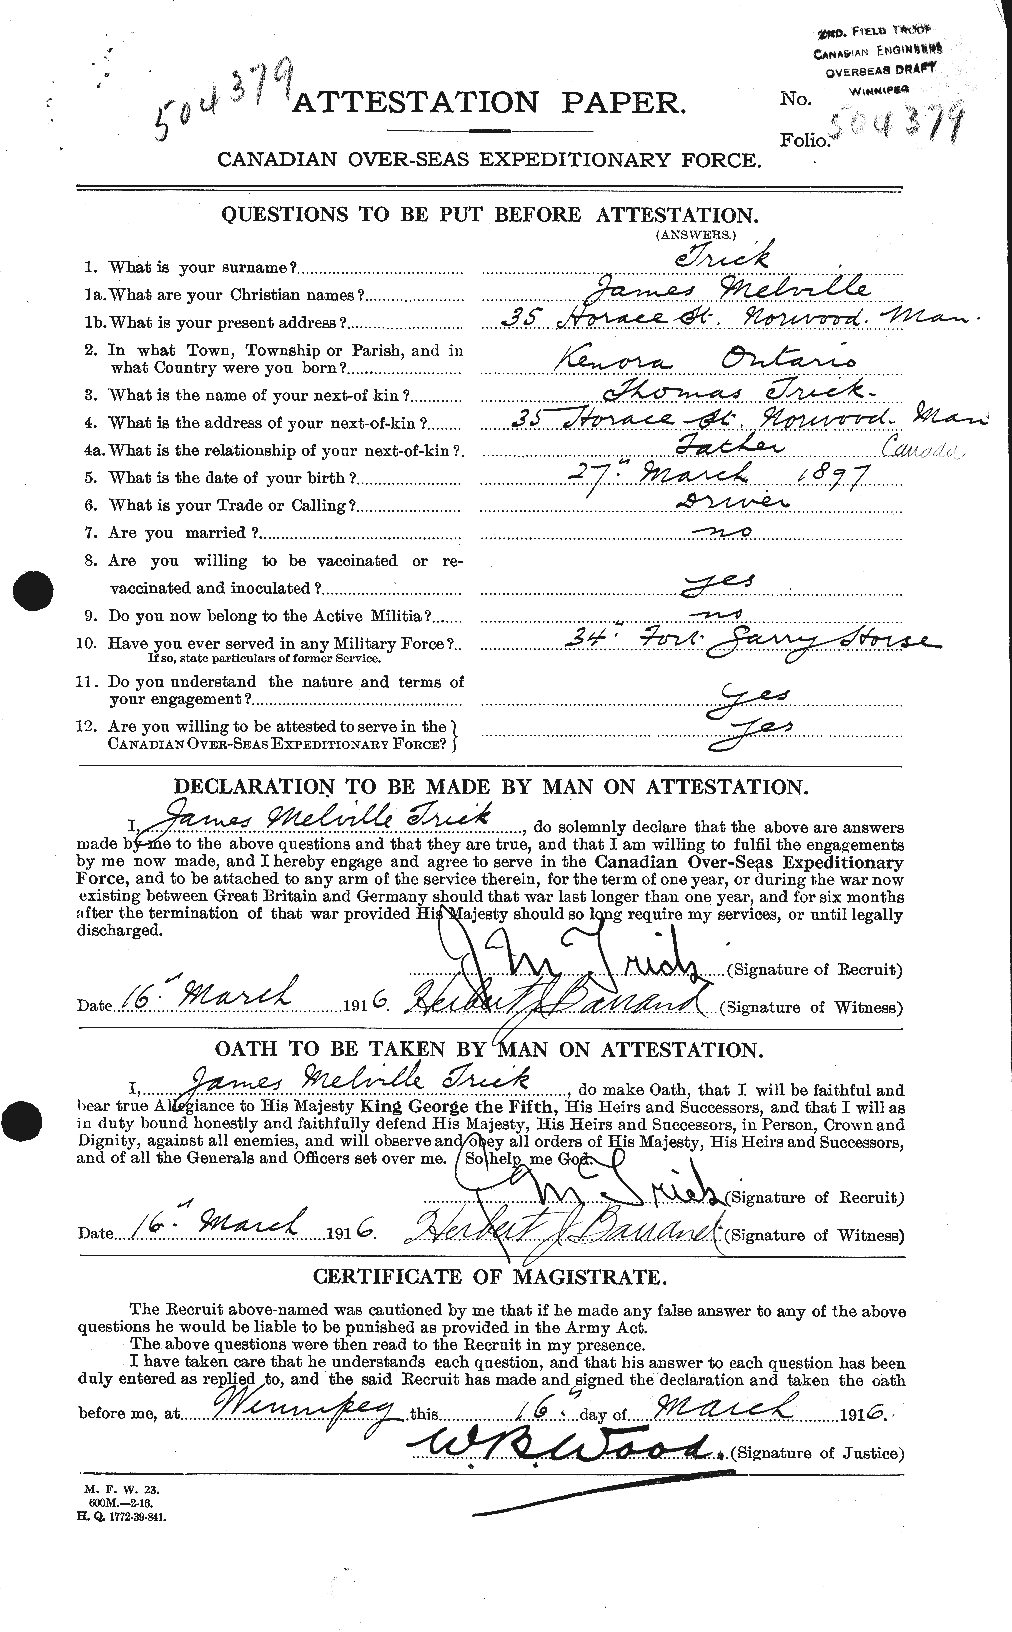 Personnel Records of the First World War - CEF 641175a